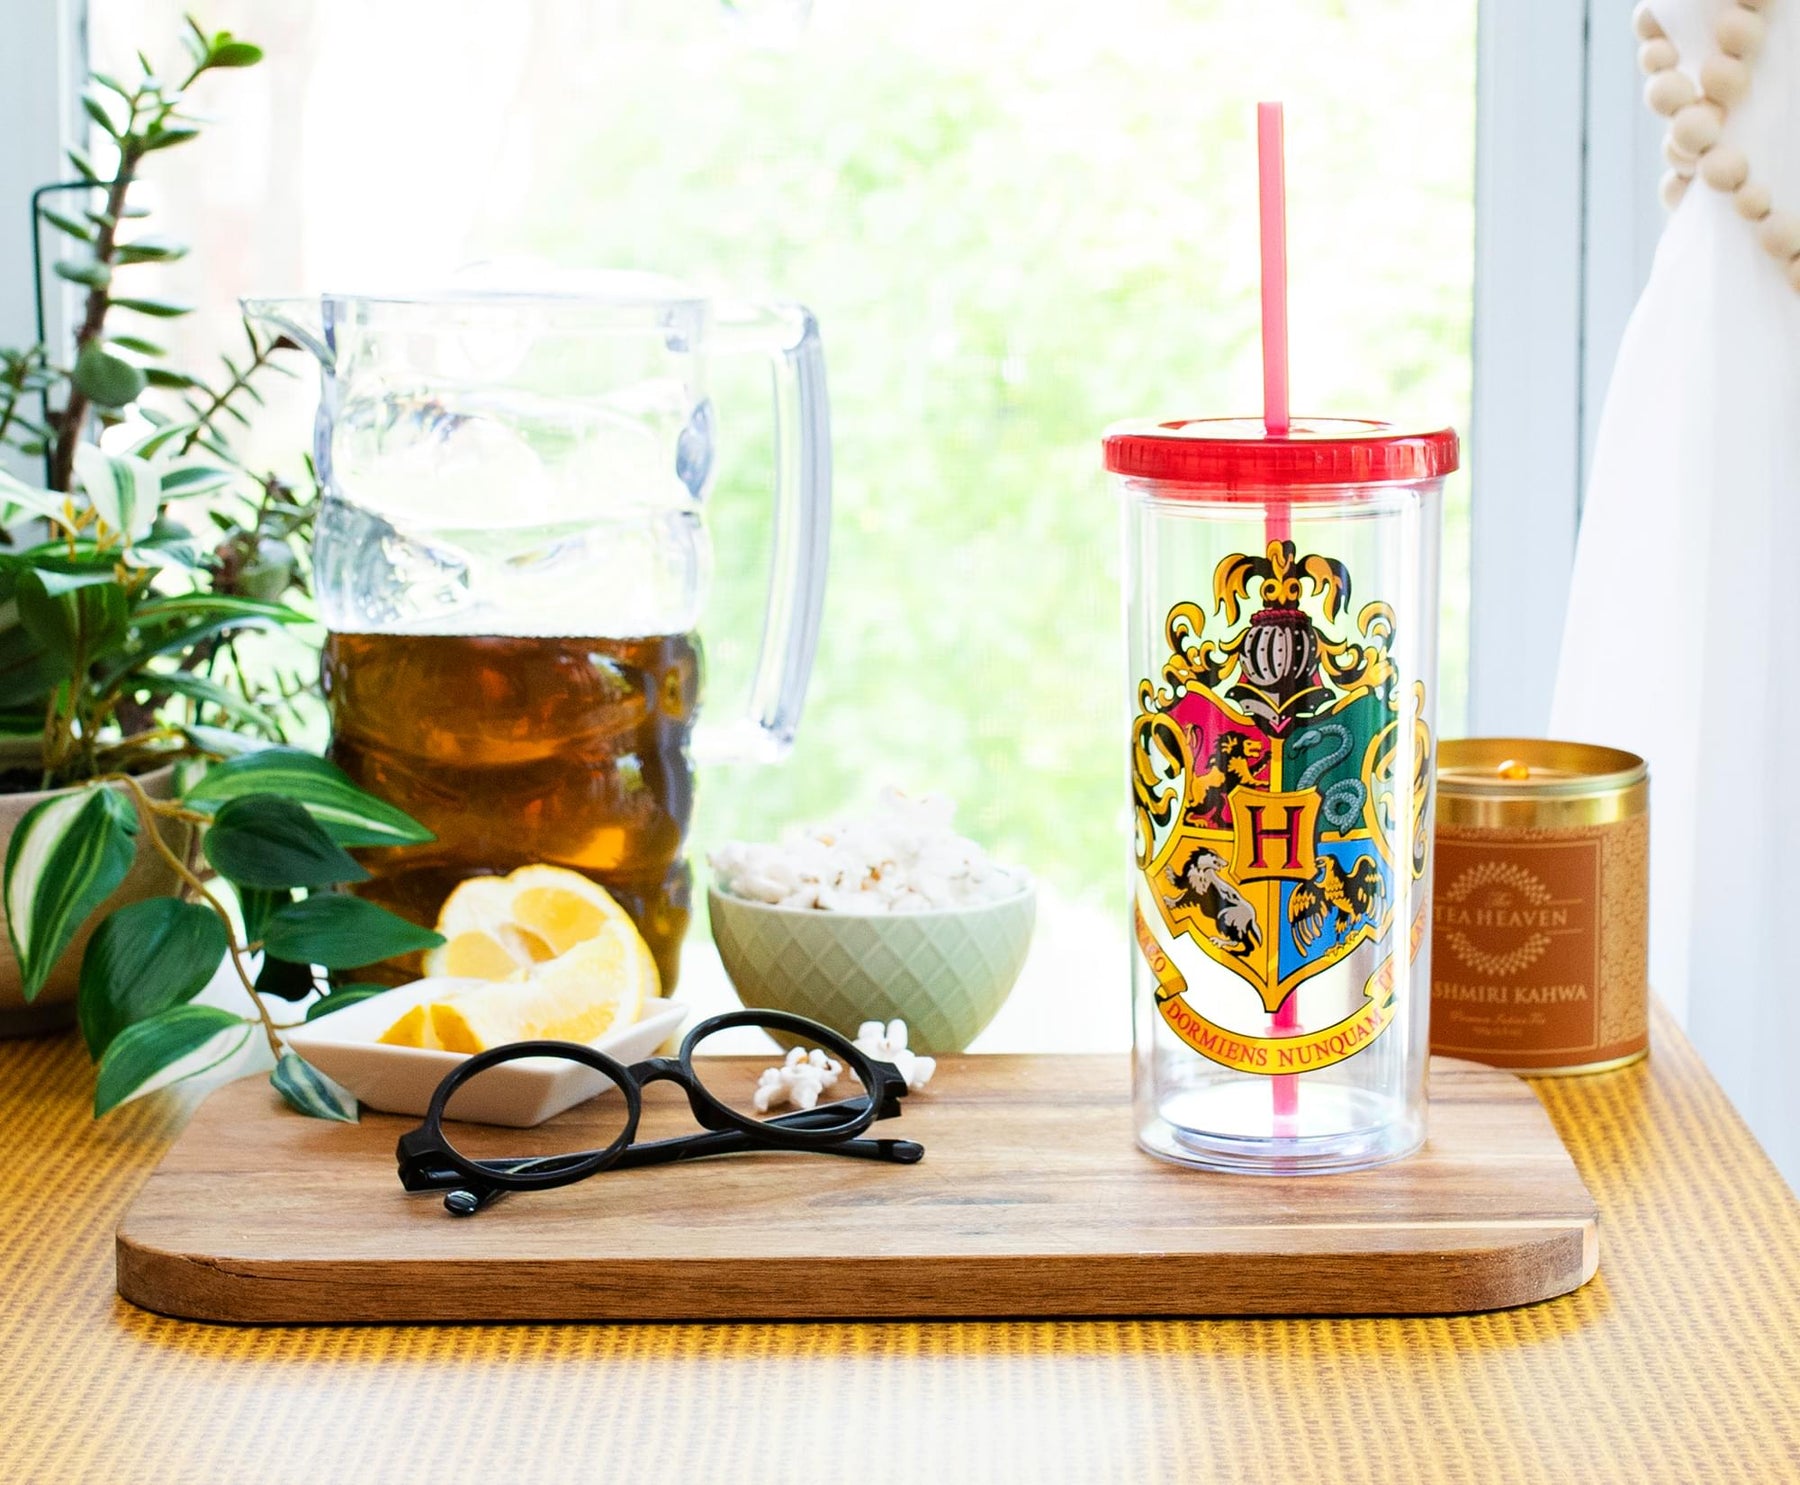 Harry Potter Hogwarts Crest Plastic Carnival Cup With Lid and Straw | 20 Ounces